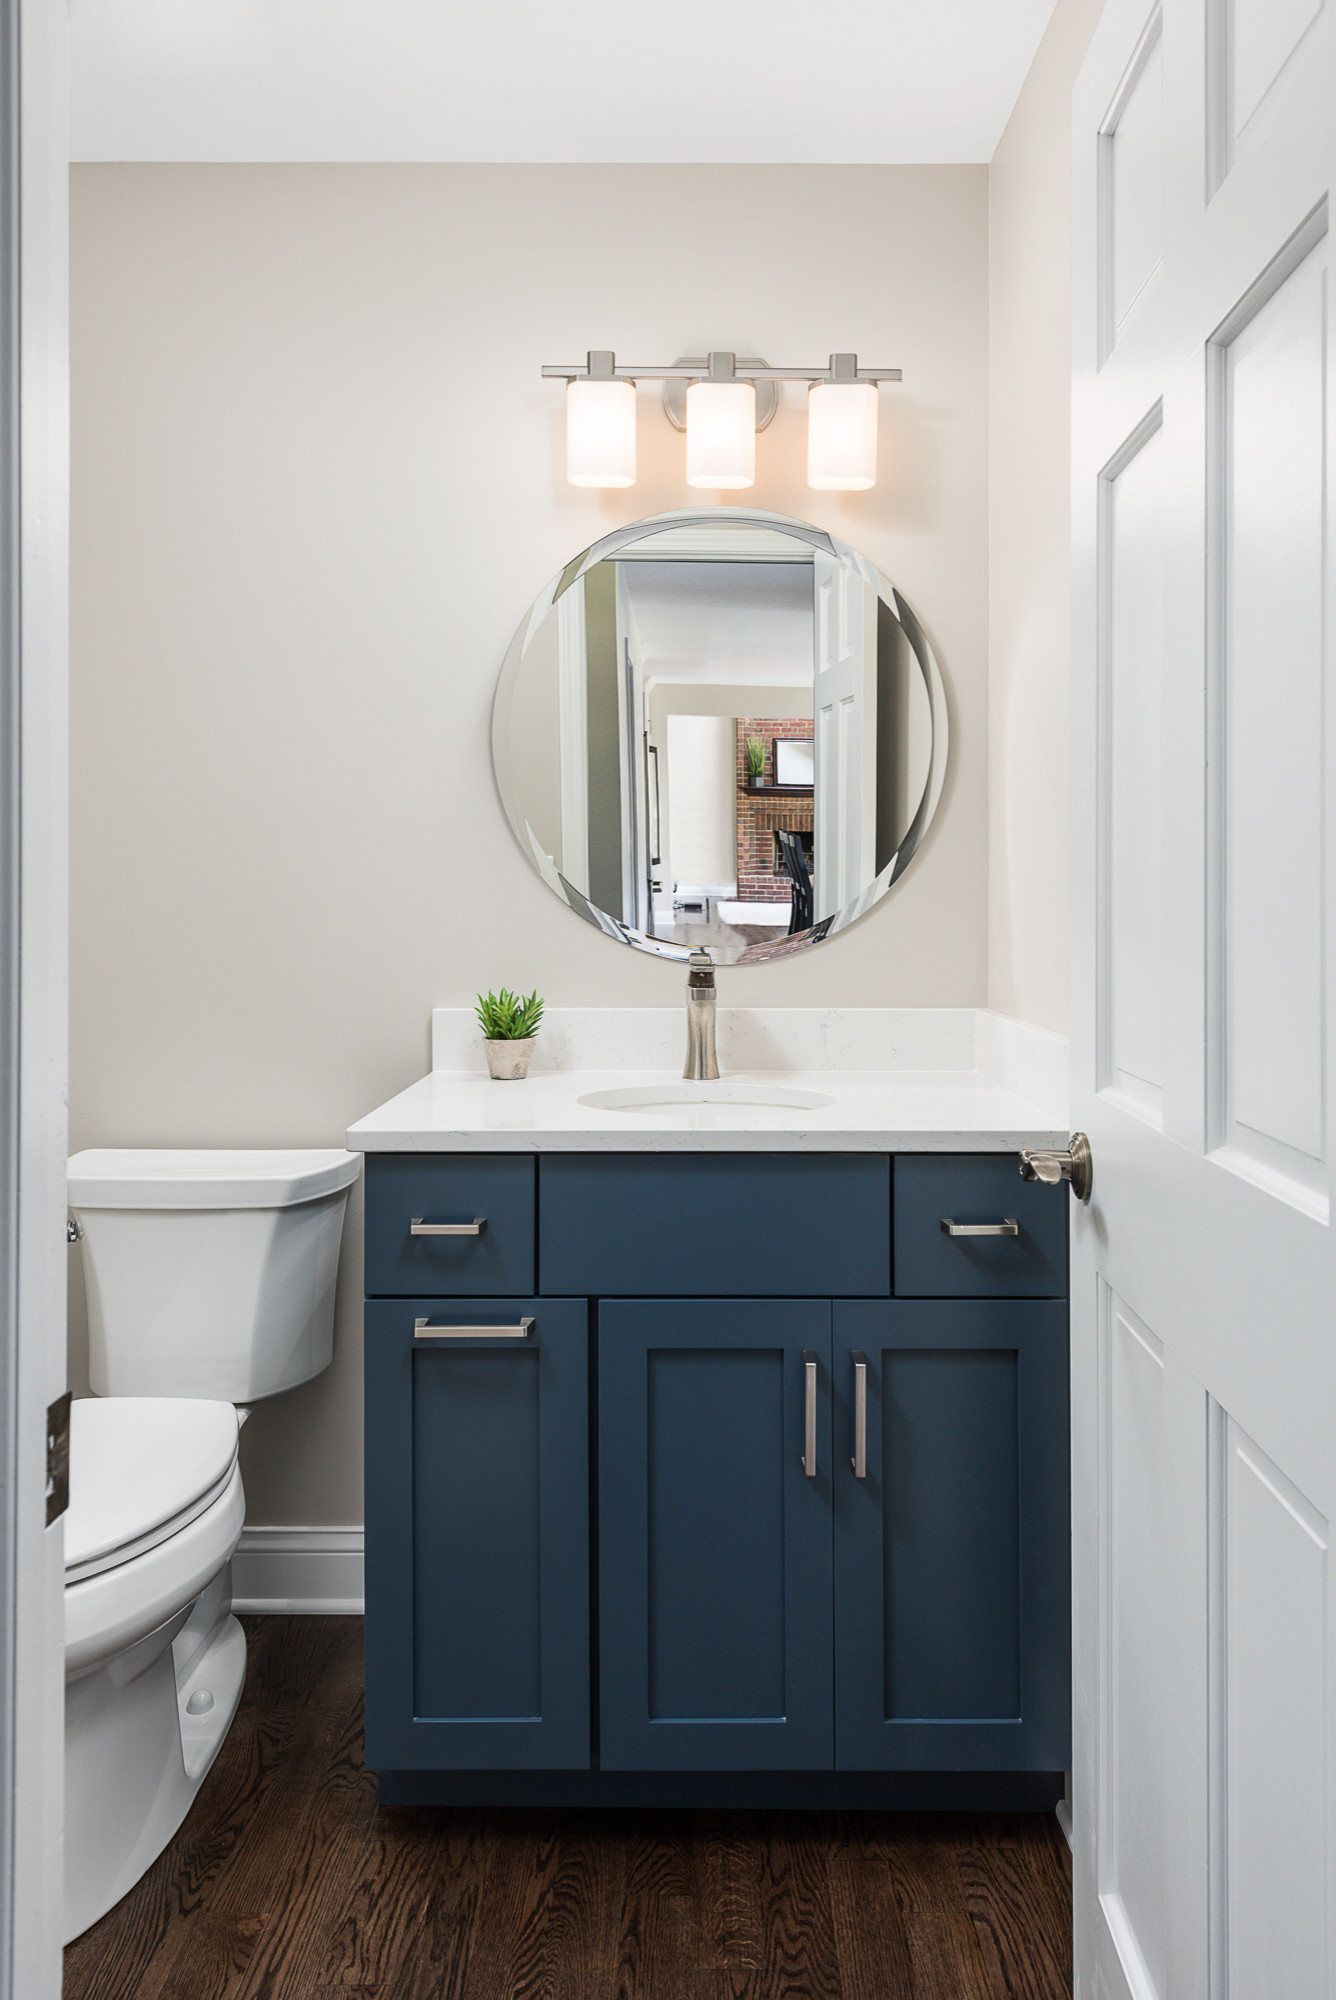 https://st.hzcdn.com/simgs/pictures/powder-rooms/transitional-kitchen-and-first-floor-pleasant-hill-remodel-lisle-redstart-construction-inc-img~fe9109530b9abede_14-3316-1-94a8b40.jpg